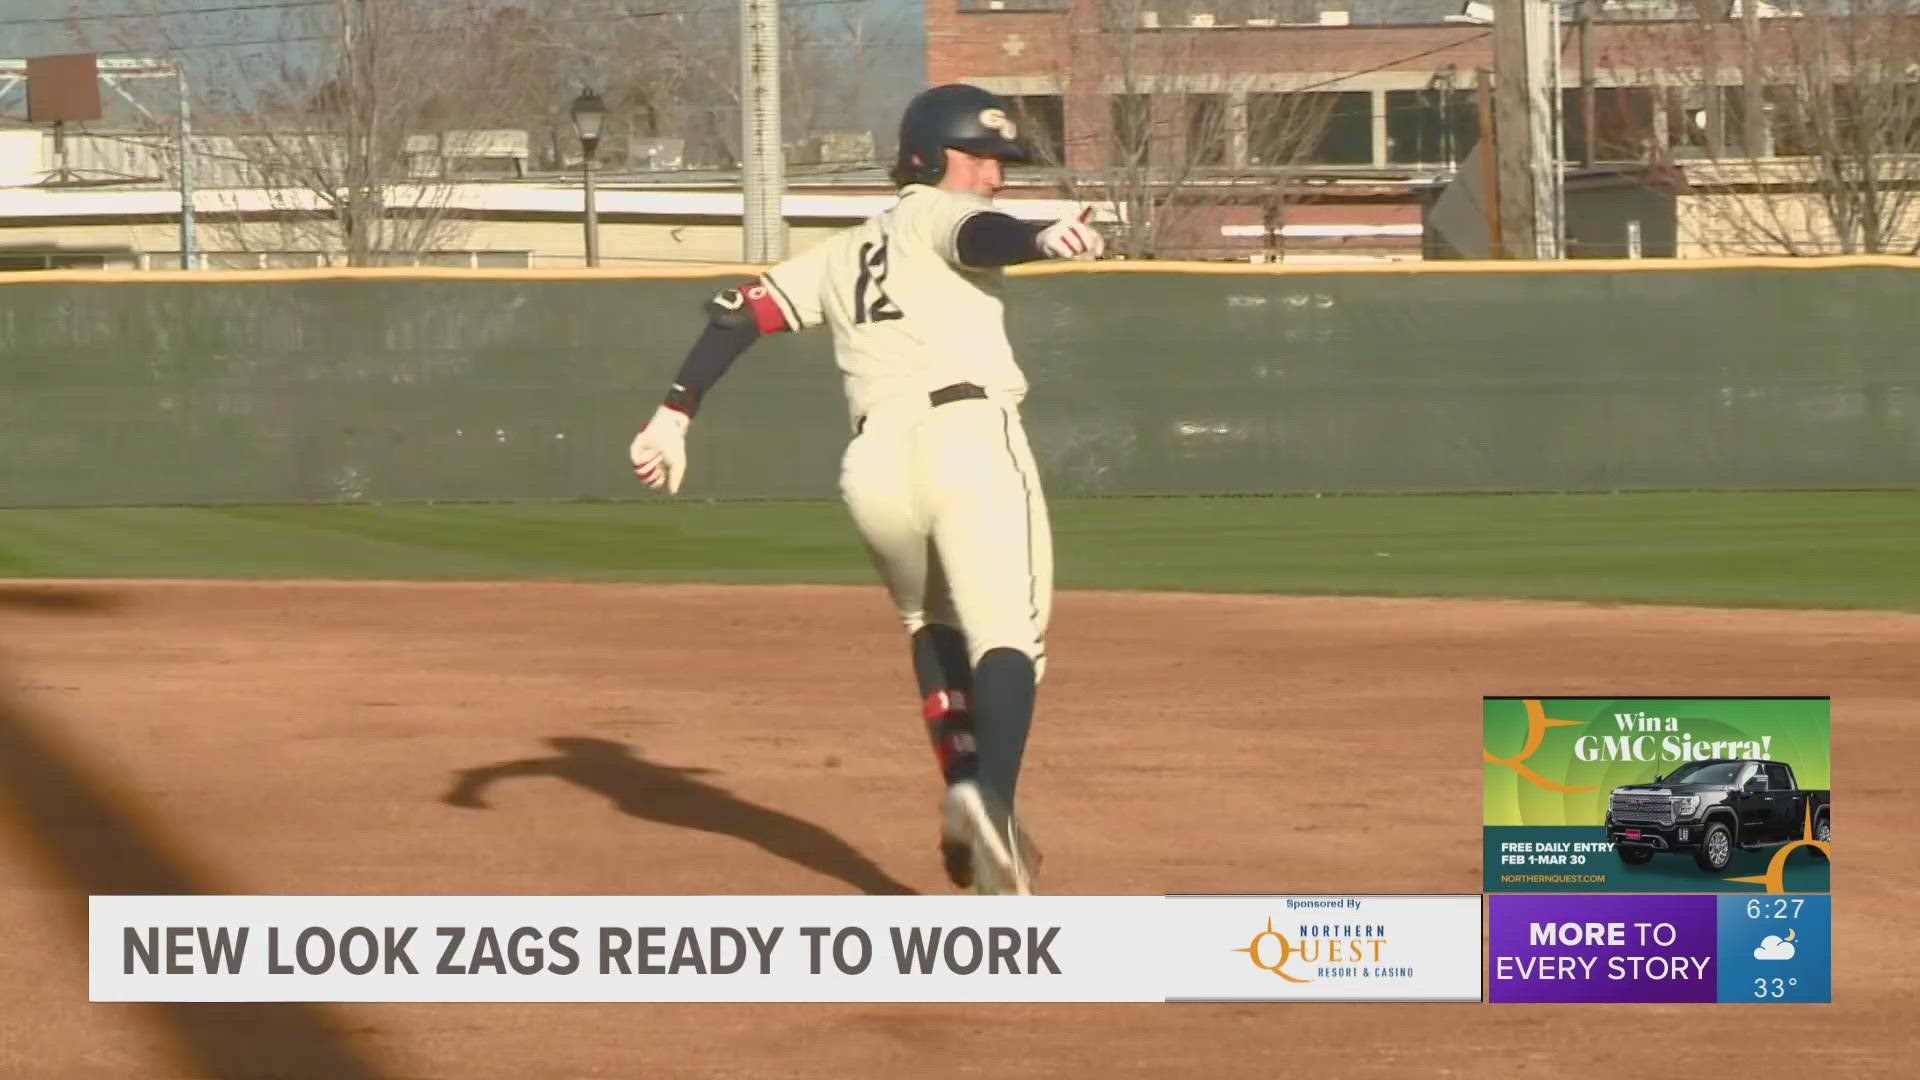 The Zags were selected to repeat as WCC champions despite losing top three starting pitchers.